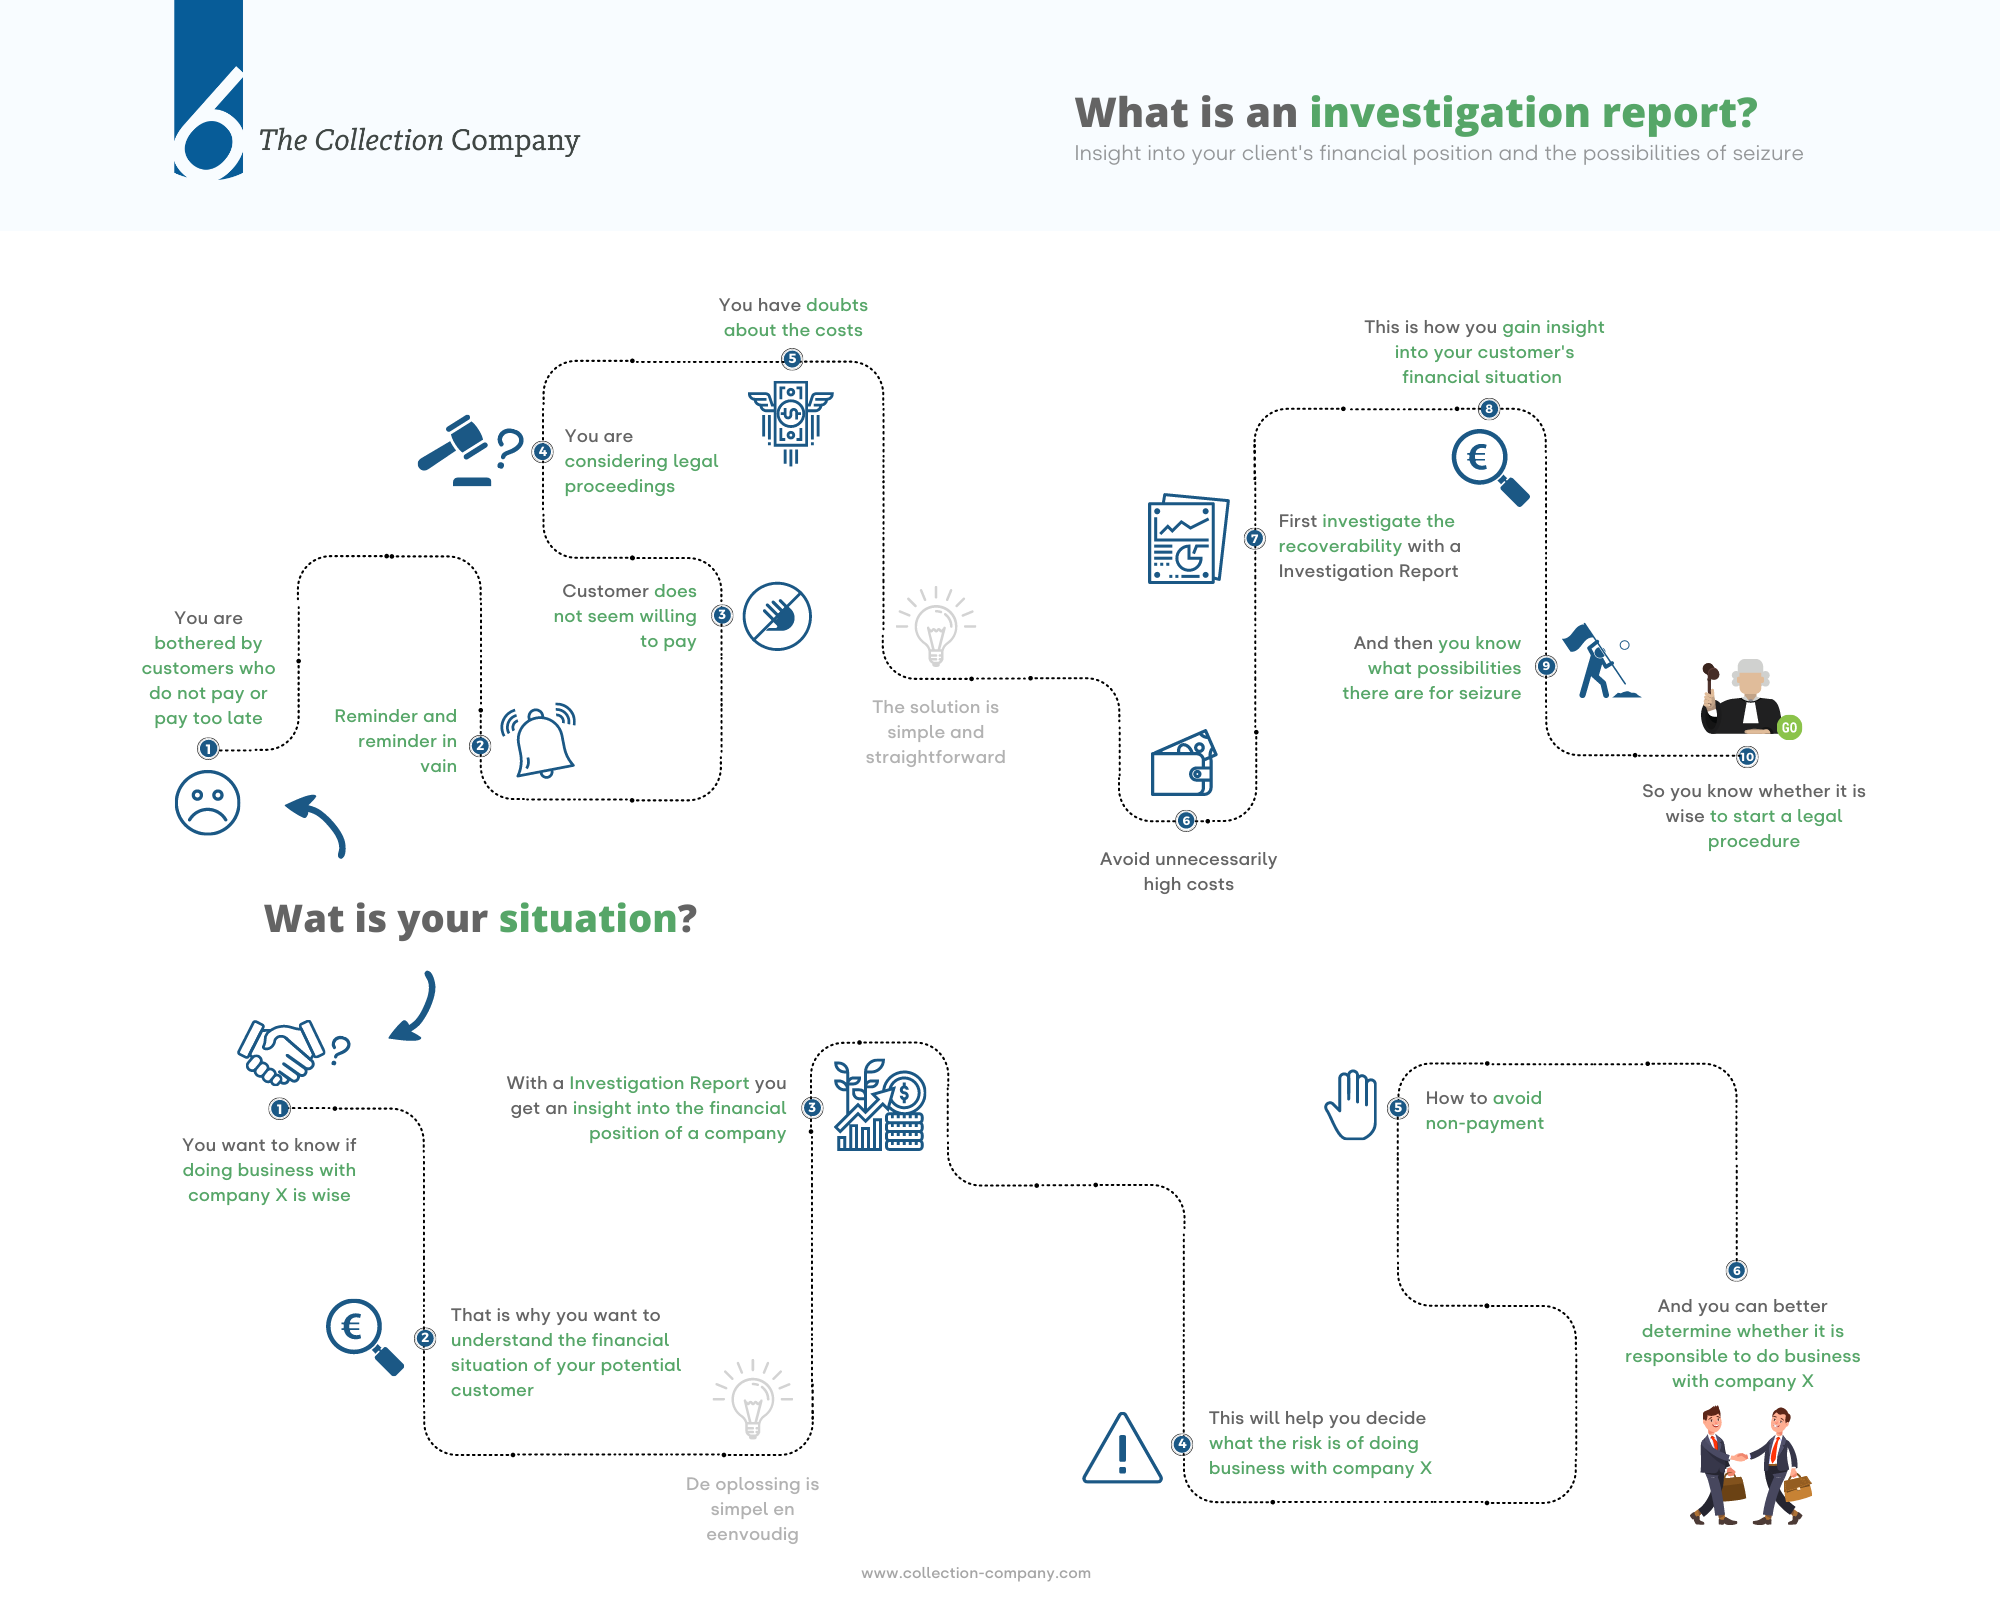 What is an investigation report?